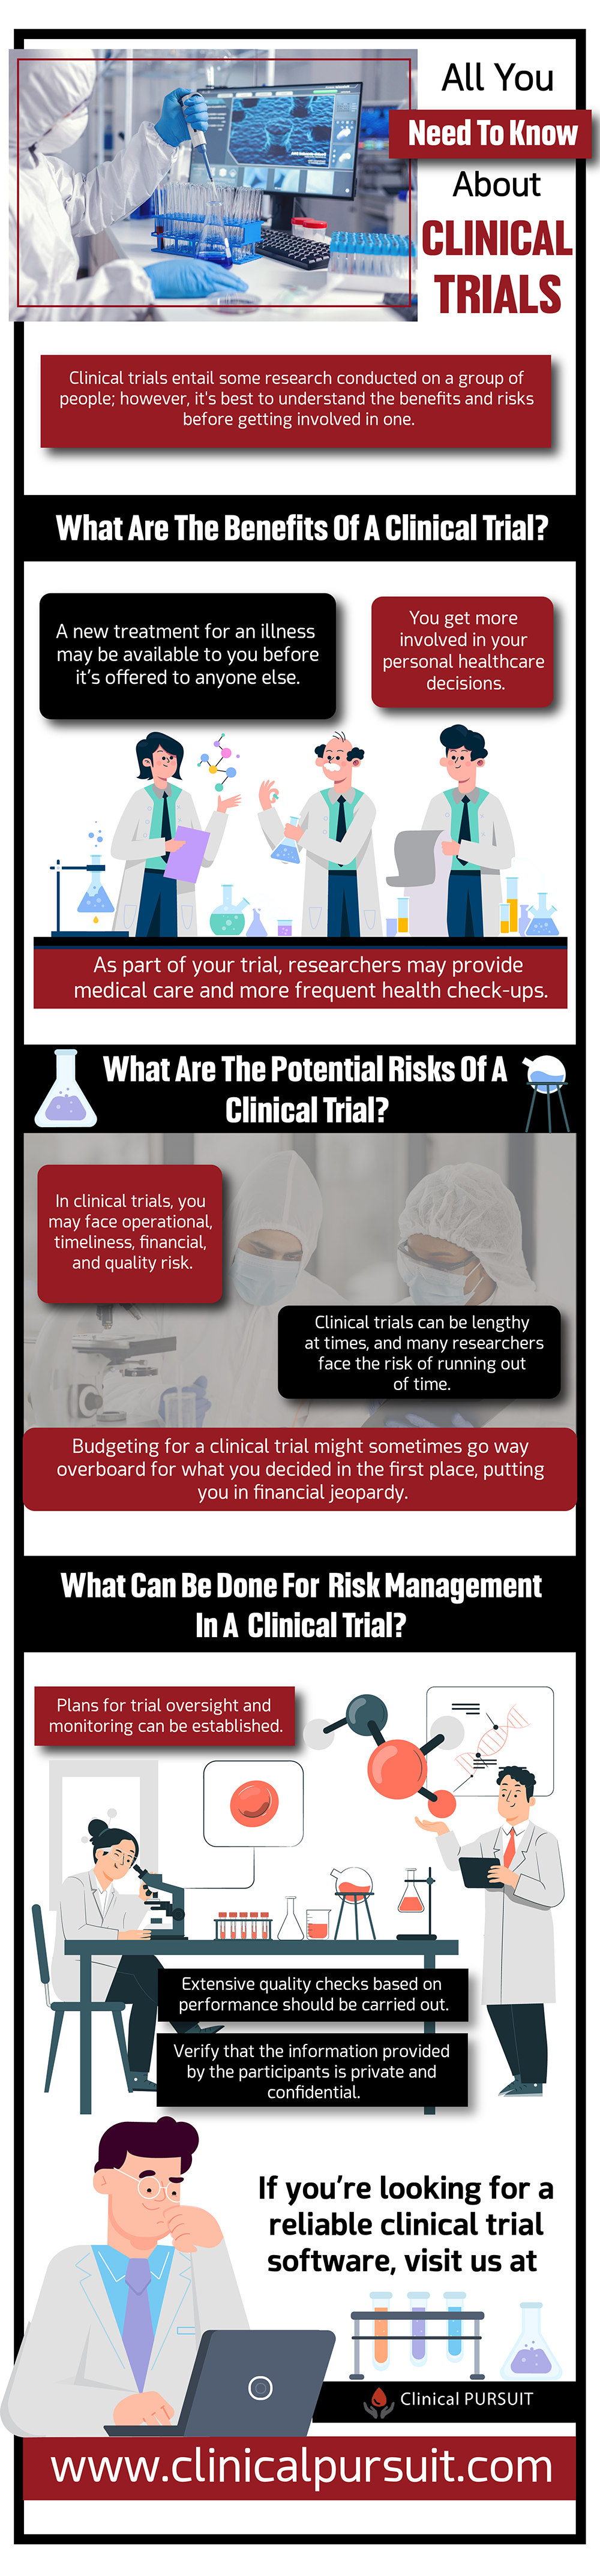 All you need to know about clinical trials infographic